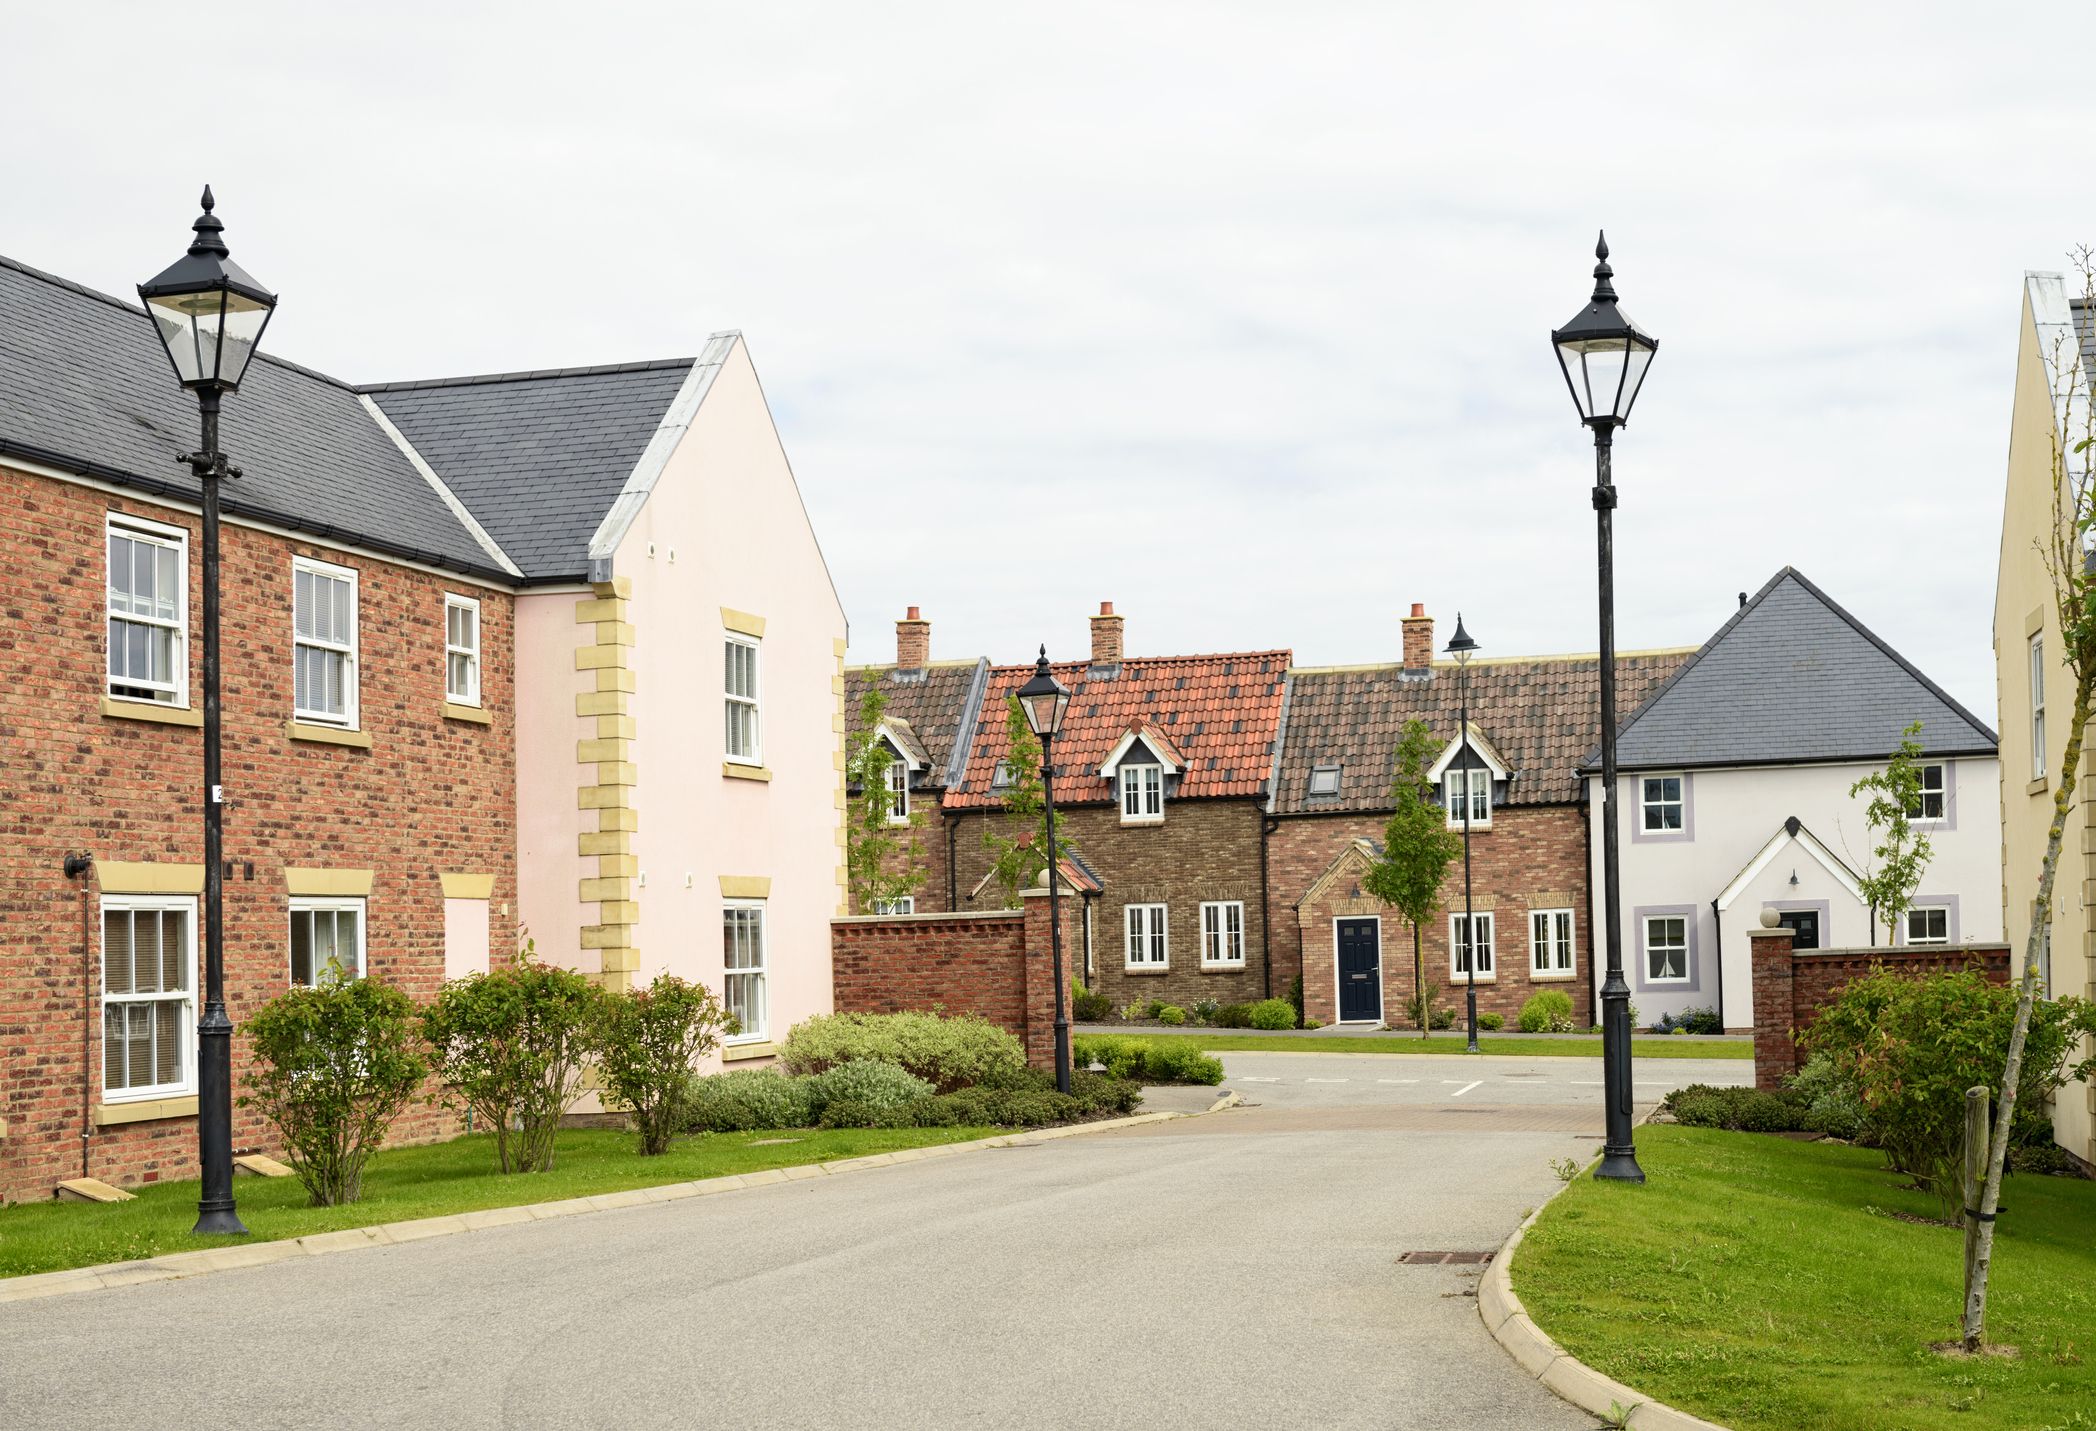 10 Most Affordable Towns To Buy a Home in The UK